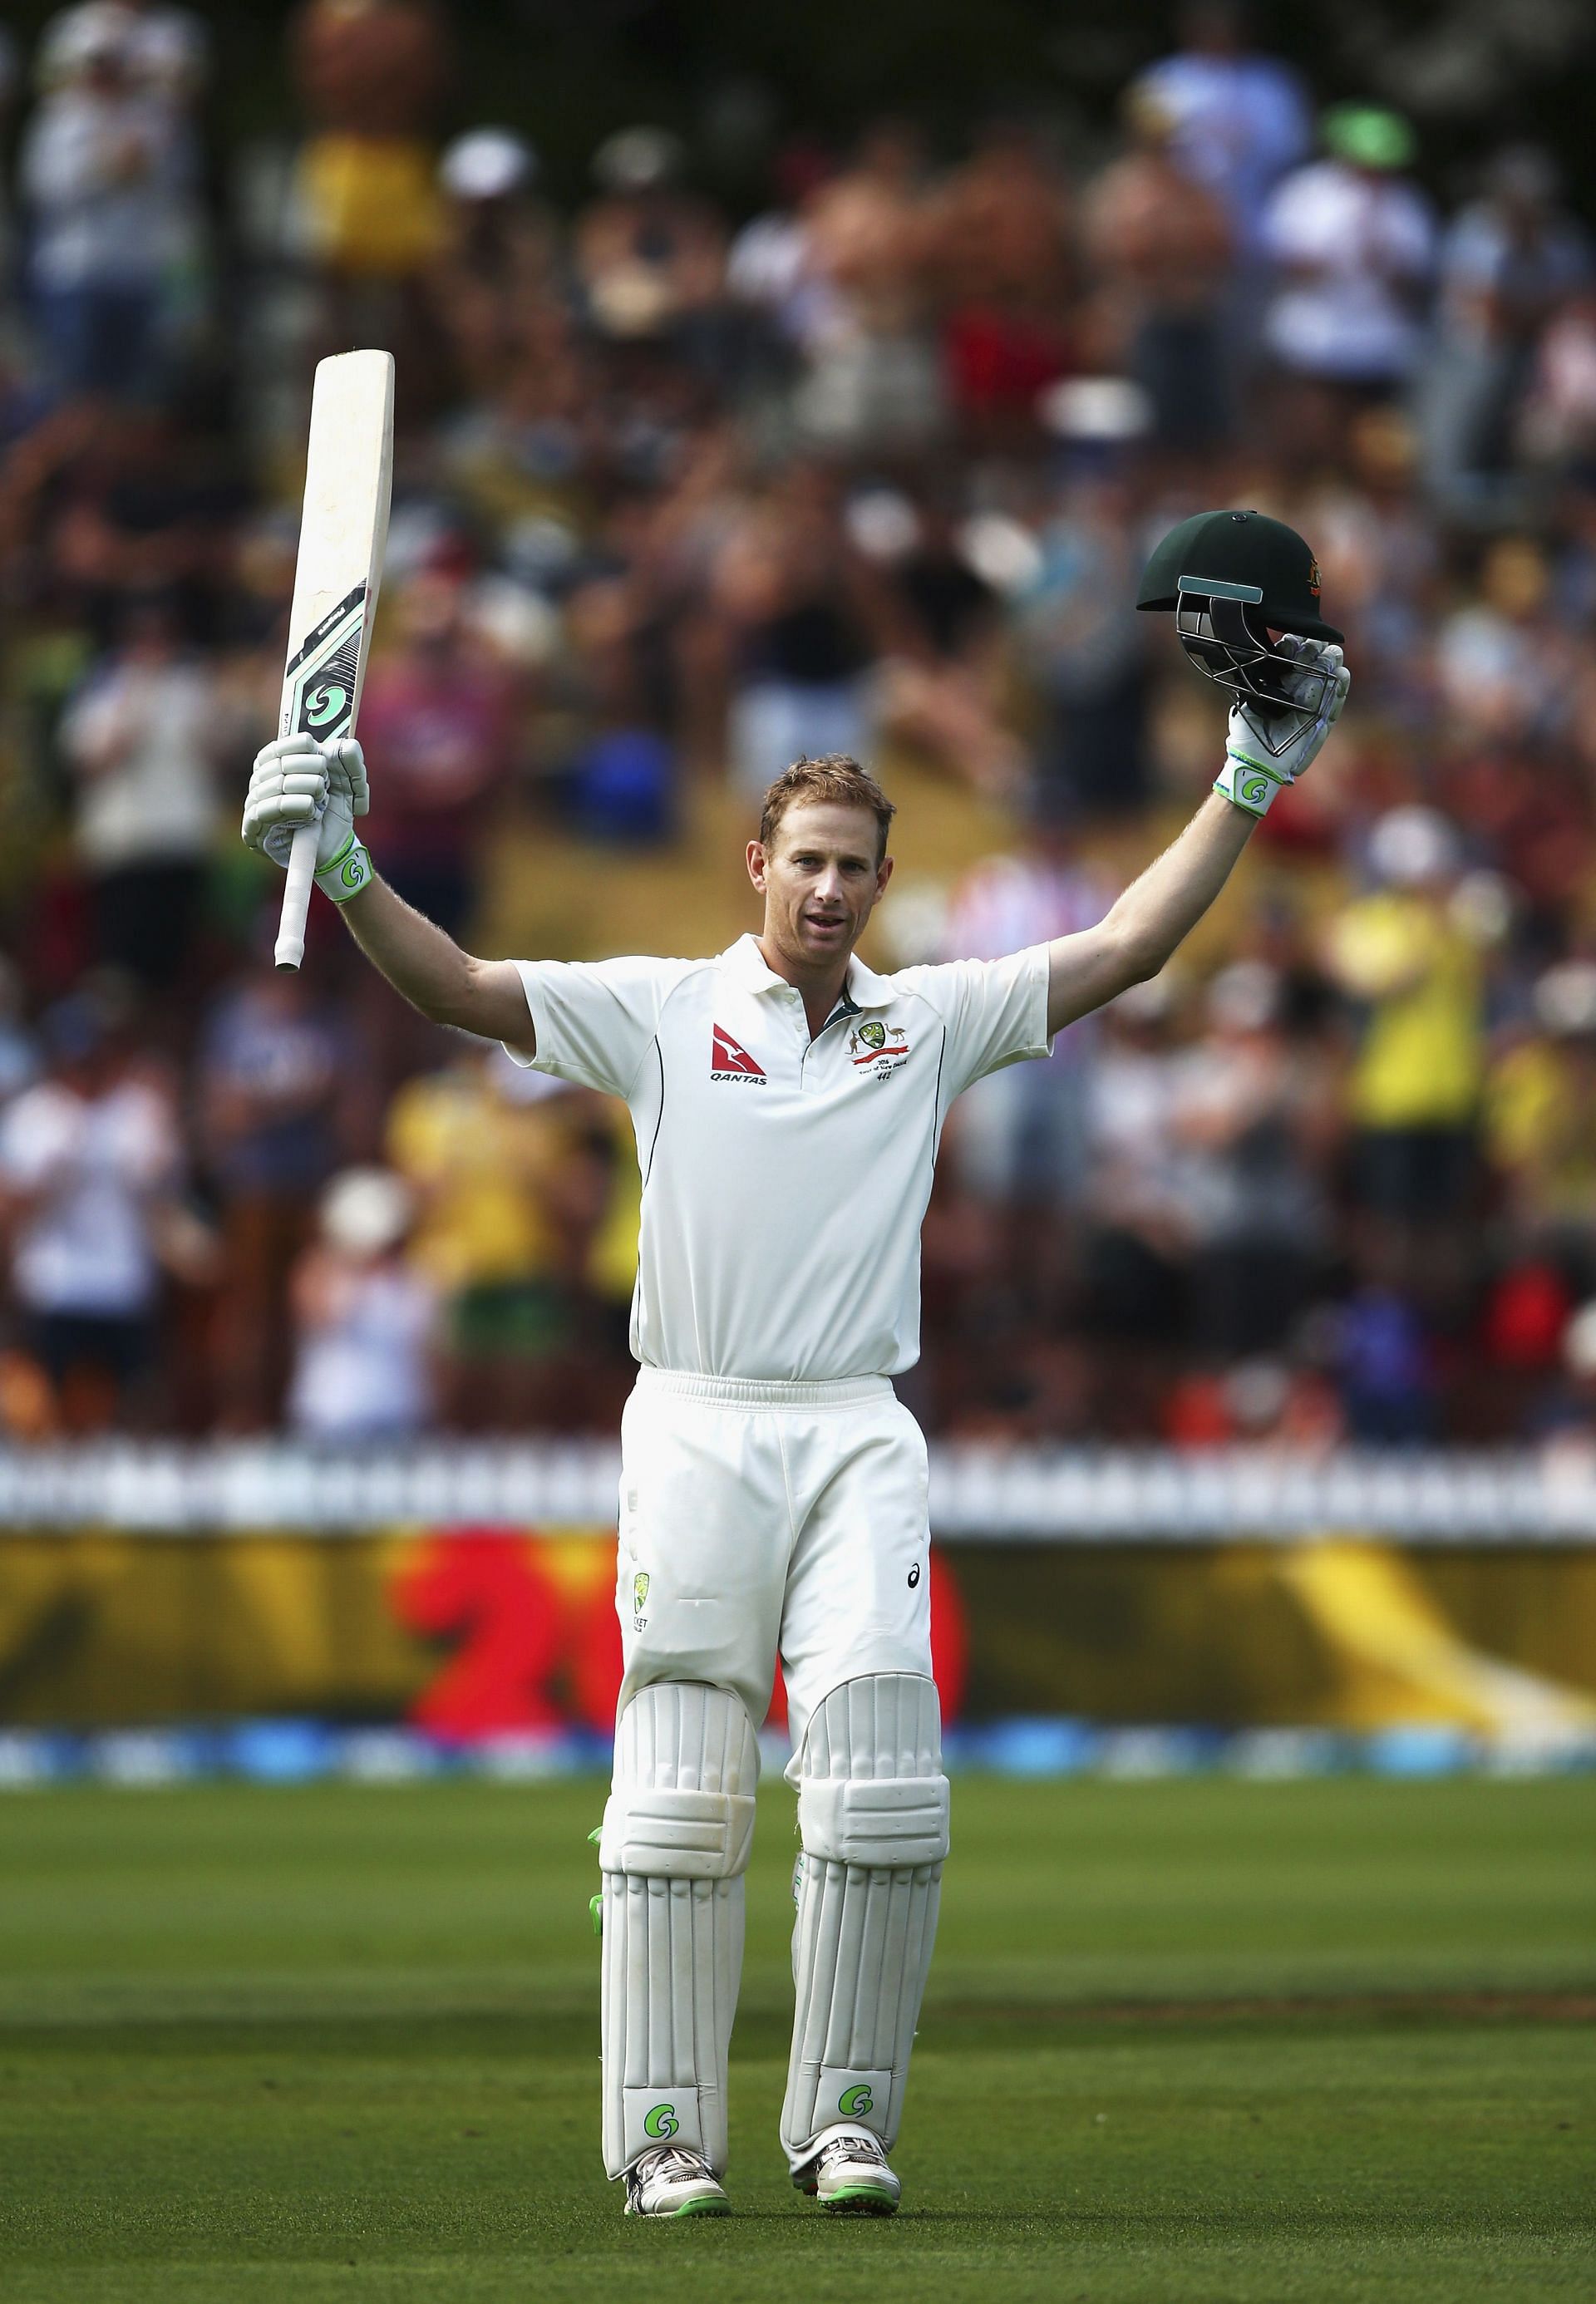 Adam Voges of Australia celebrates after reaching his double century during day three of the Test match between New Zealand and Australia at Basin Reserve on February 14, 2016, in Wellington, New Zealand.